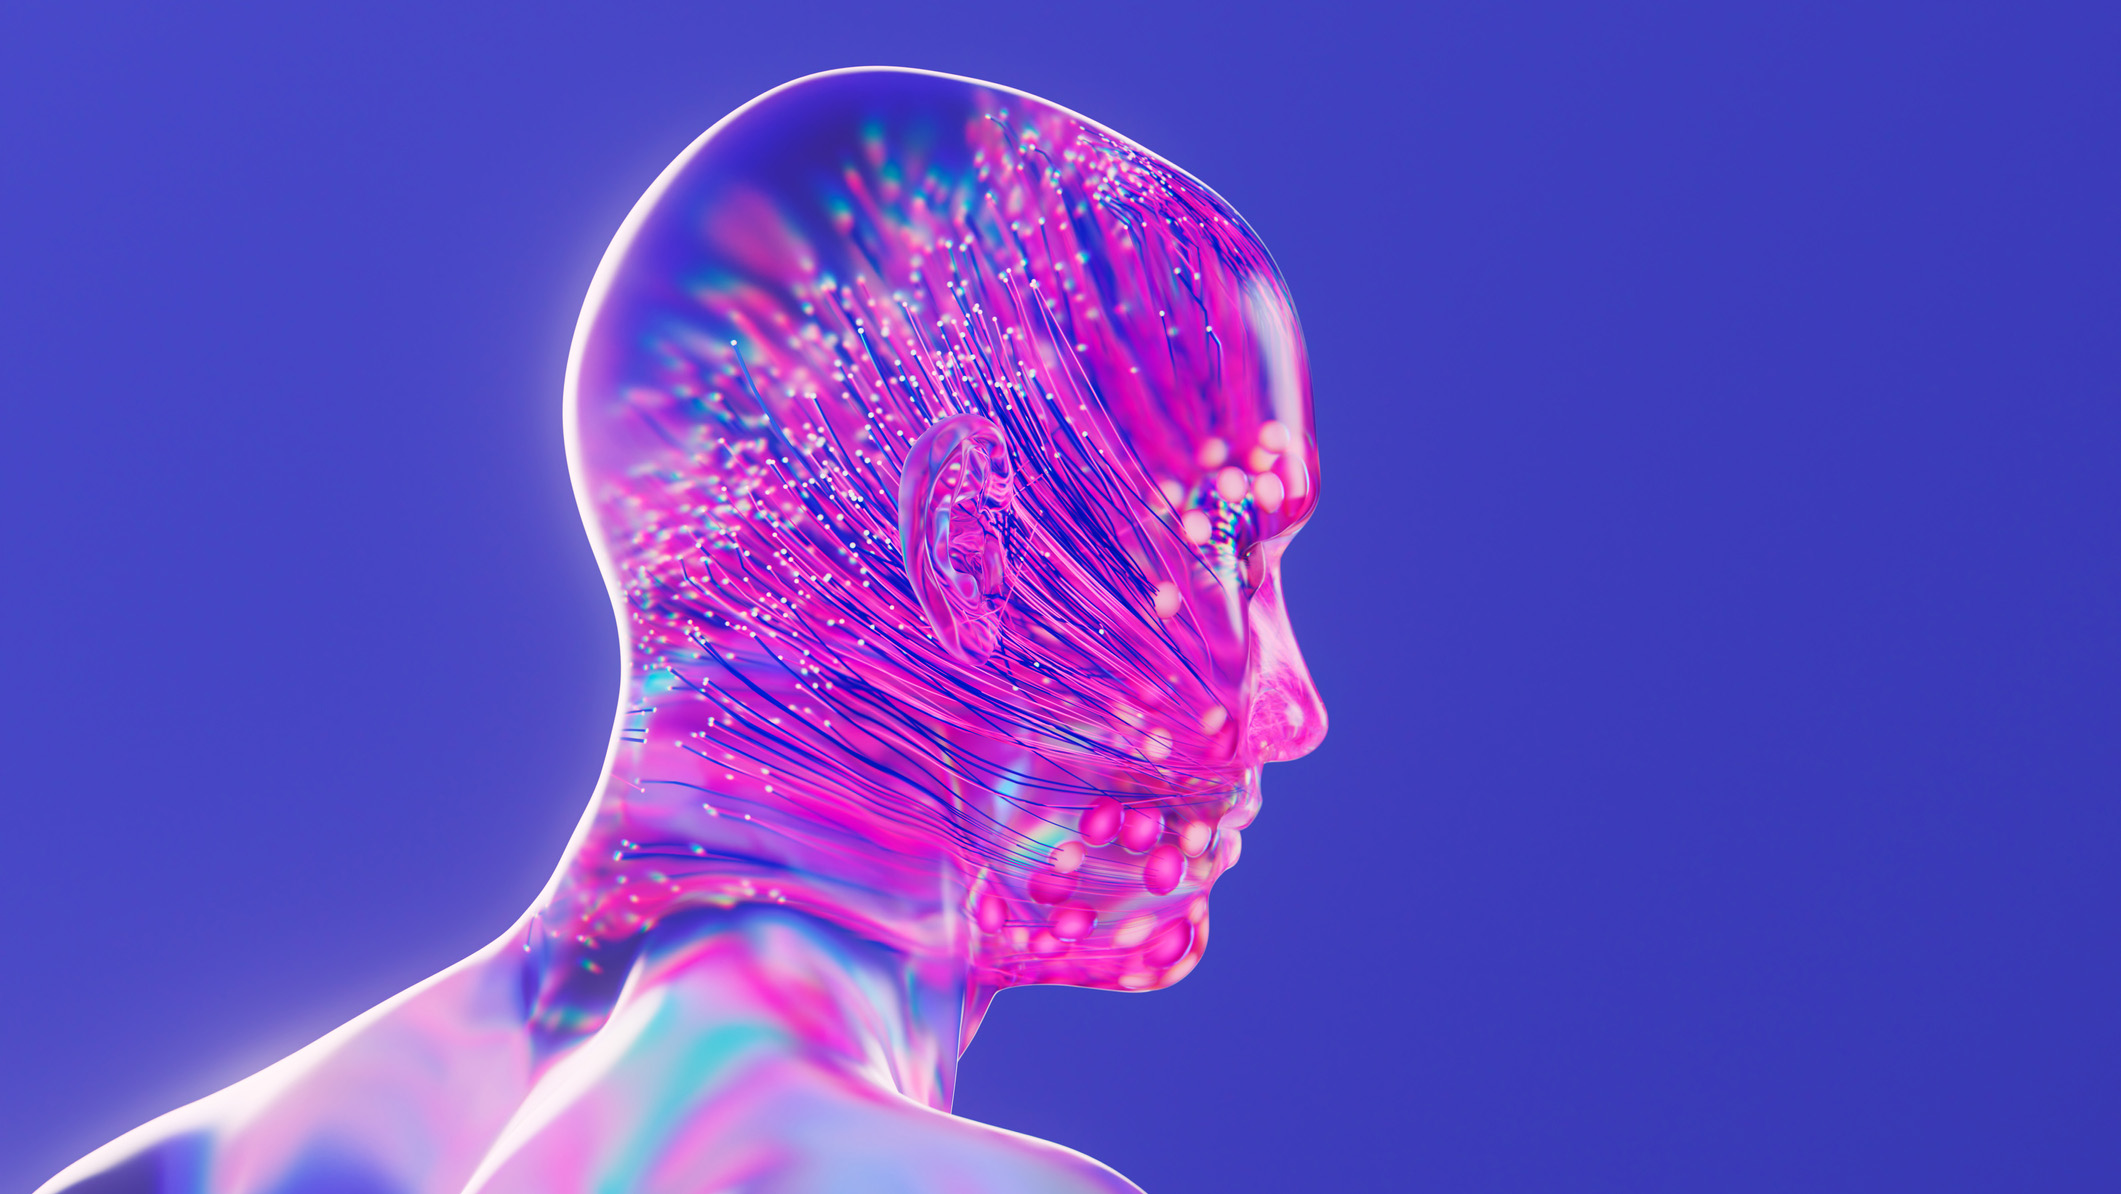 A CGI image of a purple glass statue, with its back three-quarters to the back of the camera to represent an AI assistant. It is set against a solid blue background.